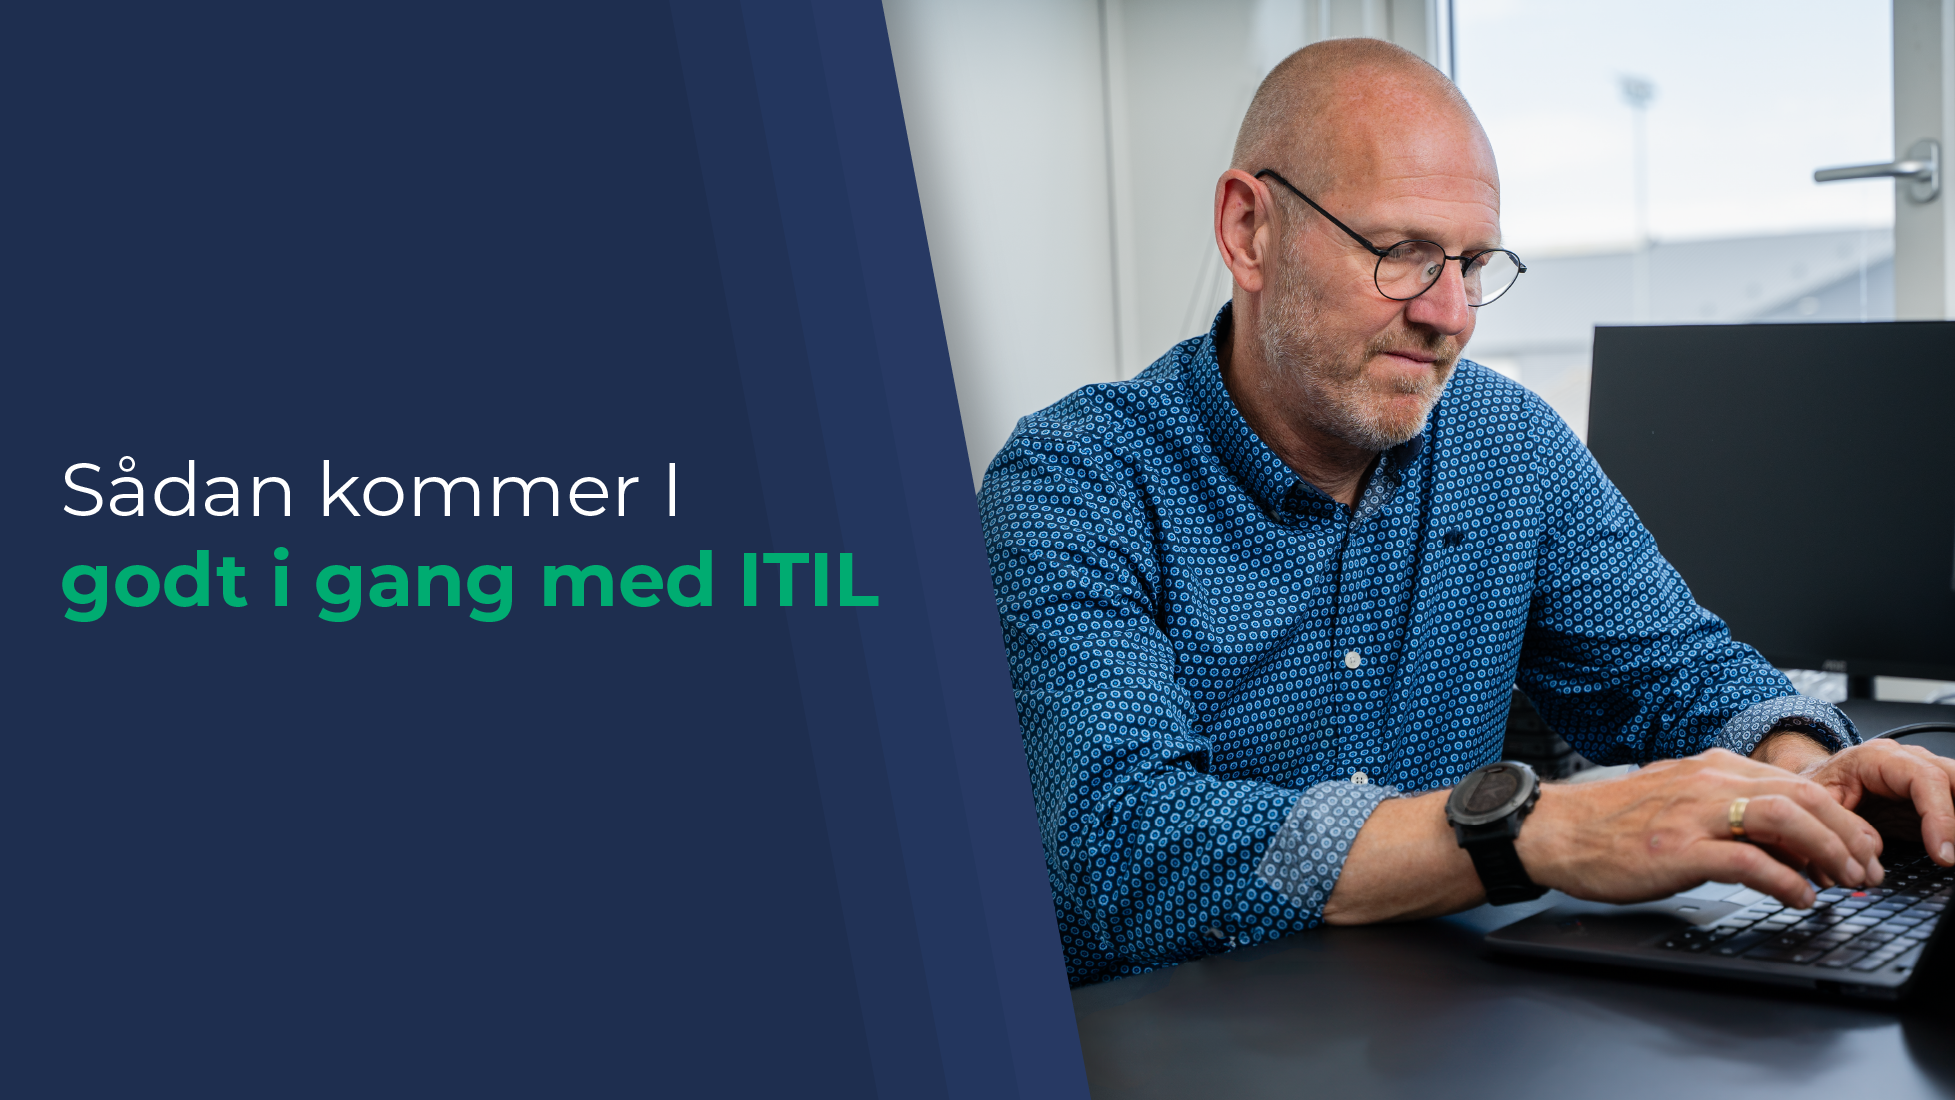 In this blog post, we take a closer look at how you can implement ITIL processes and our best practice suggestions.